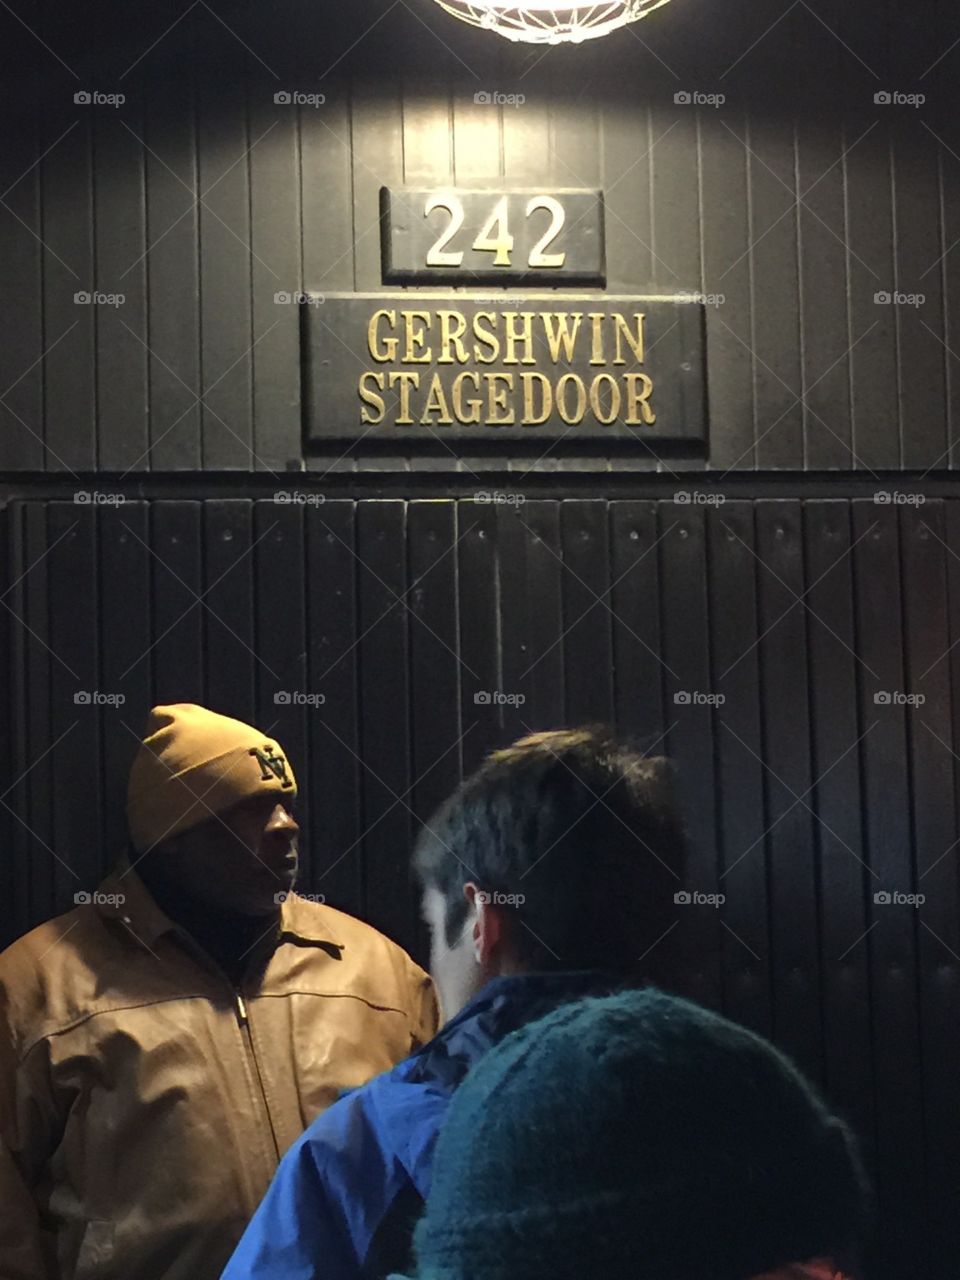 Gershwin Theatre. The stage door at the Gershwin Theatre in NYC.